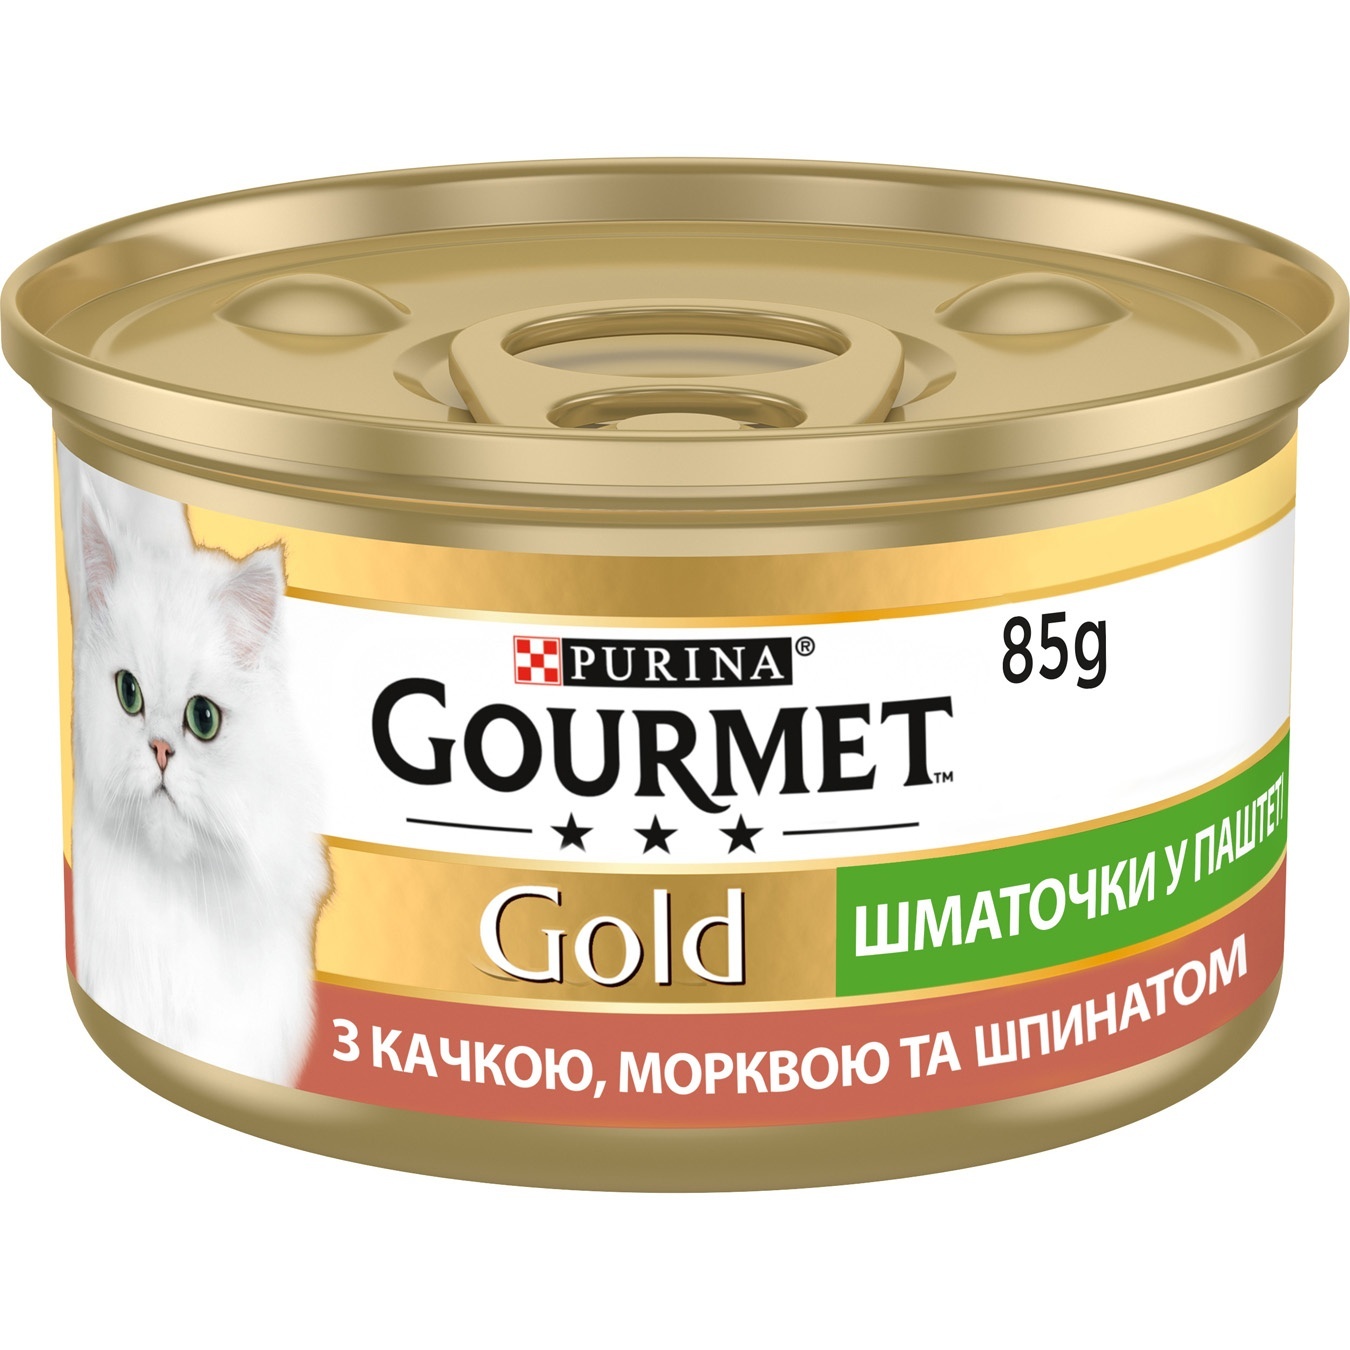 Purina Gourmet for cats canned with duck, carrot and spinach in pate food 85g